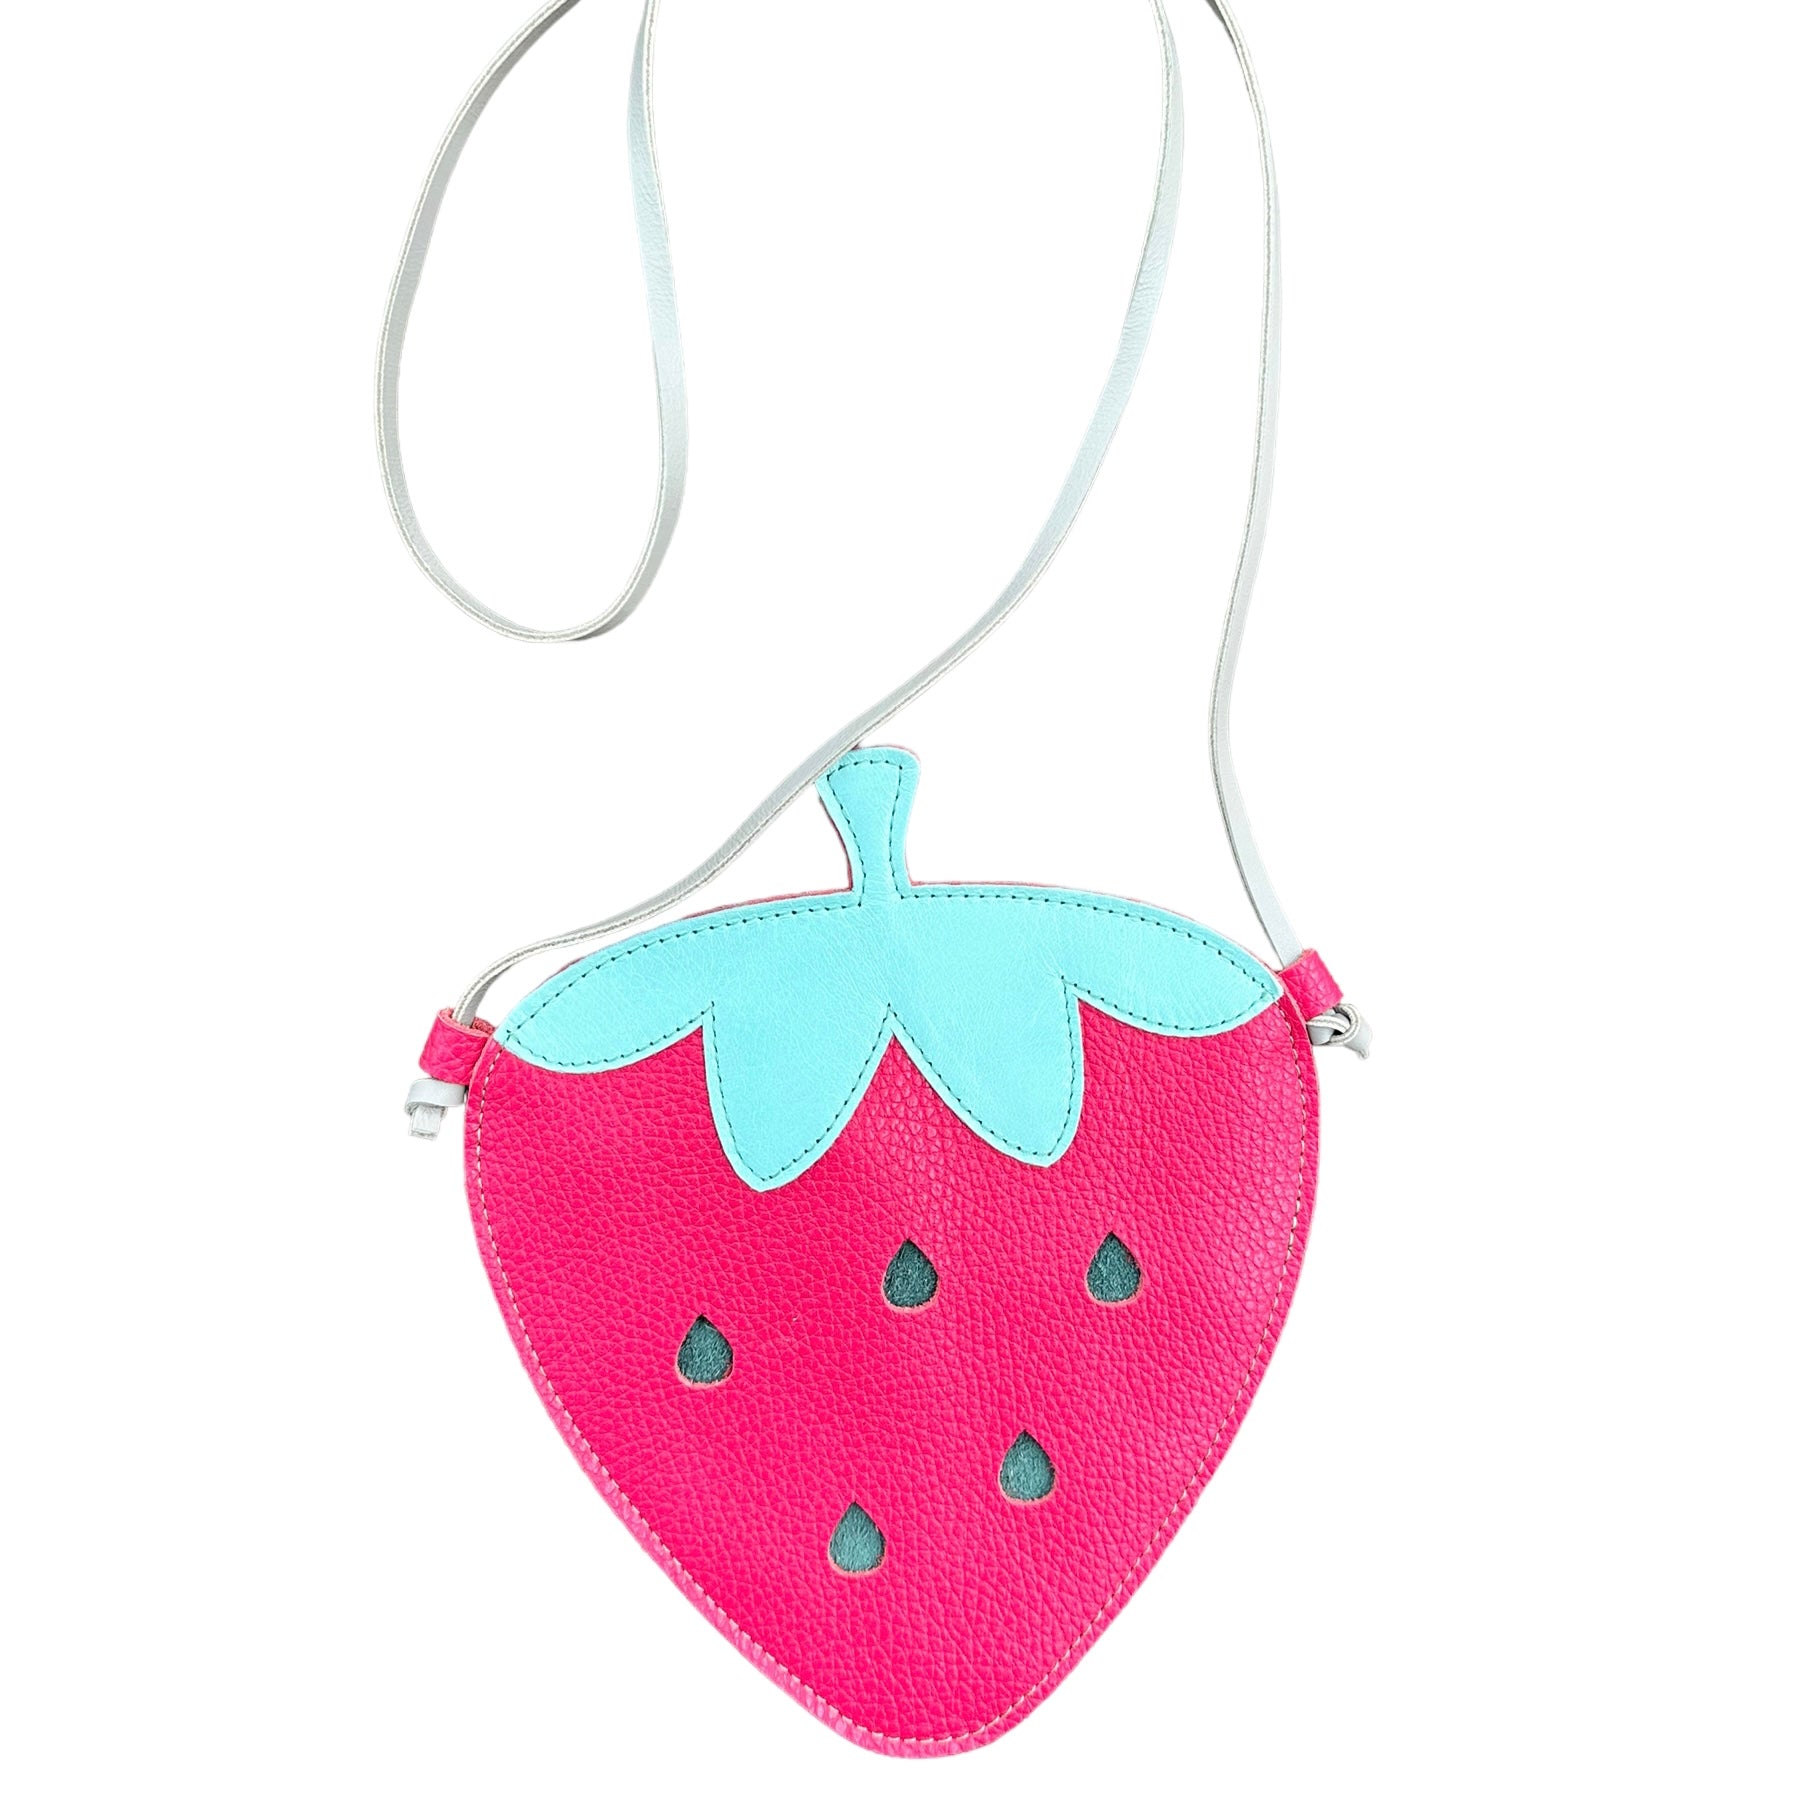 Strawberry Leather Bag